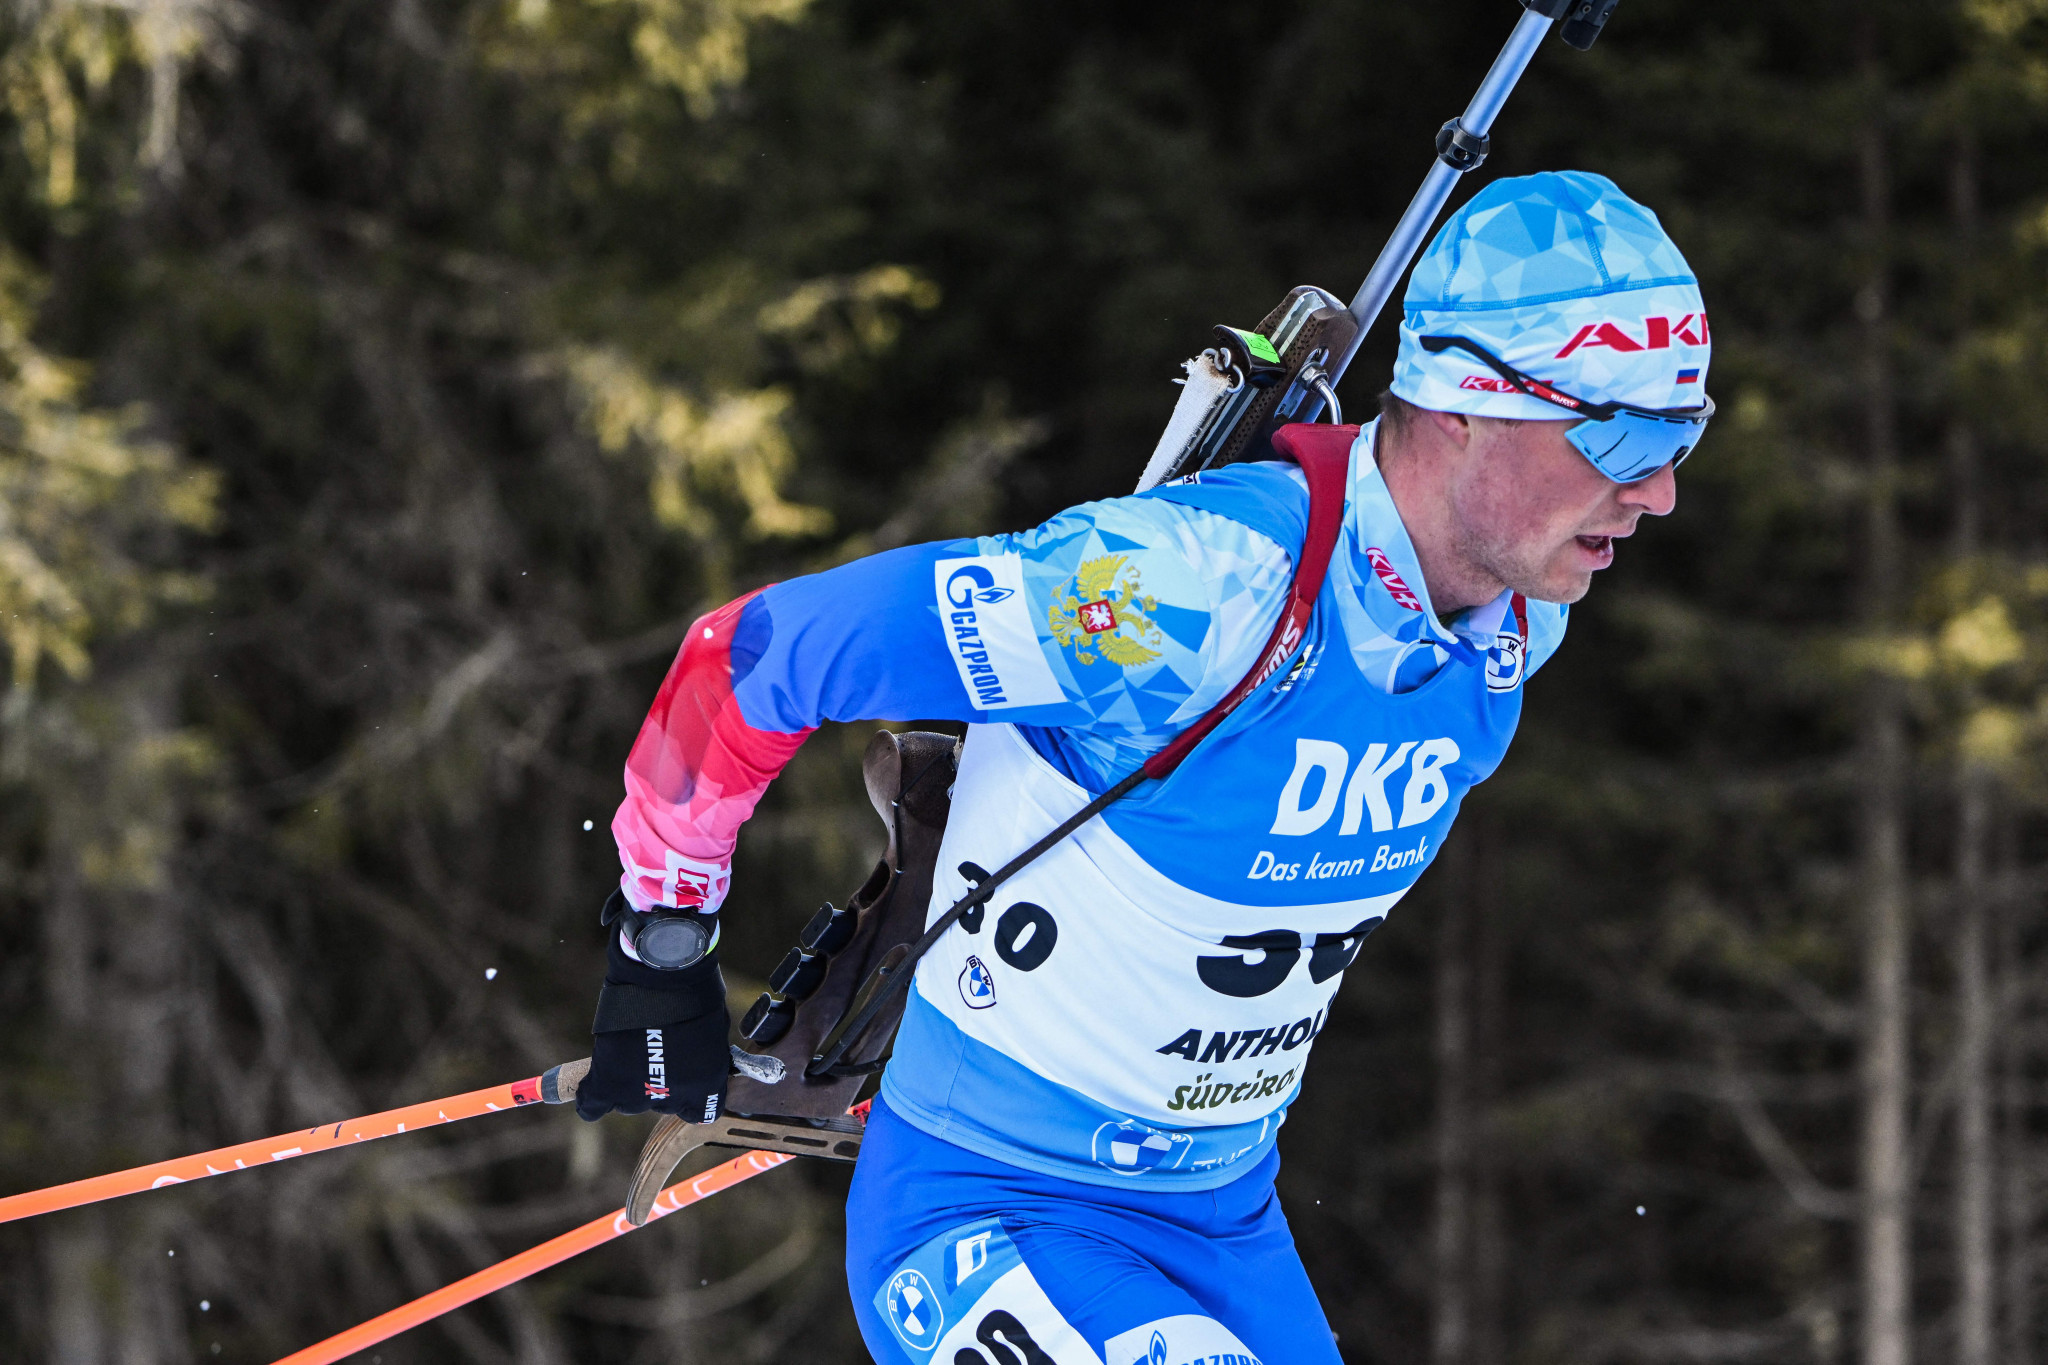 Babikov earns first Biathlon World Cup victory of the season in Antholz-Anterselva